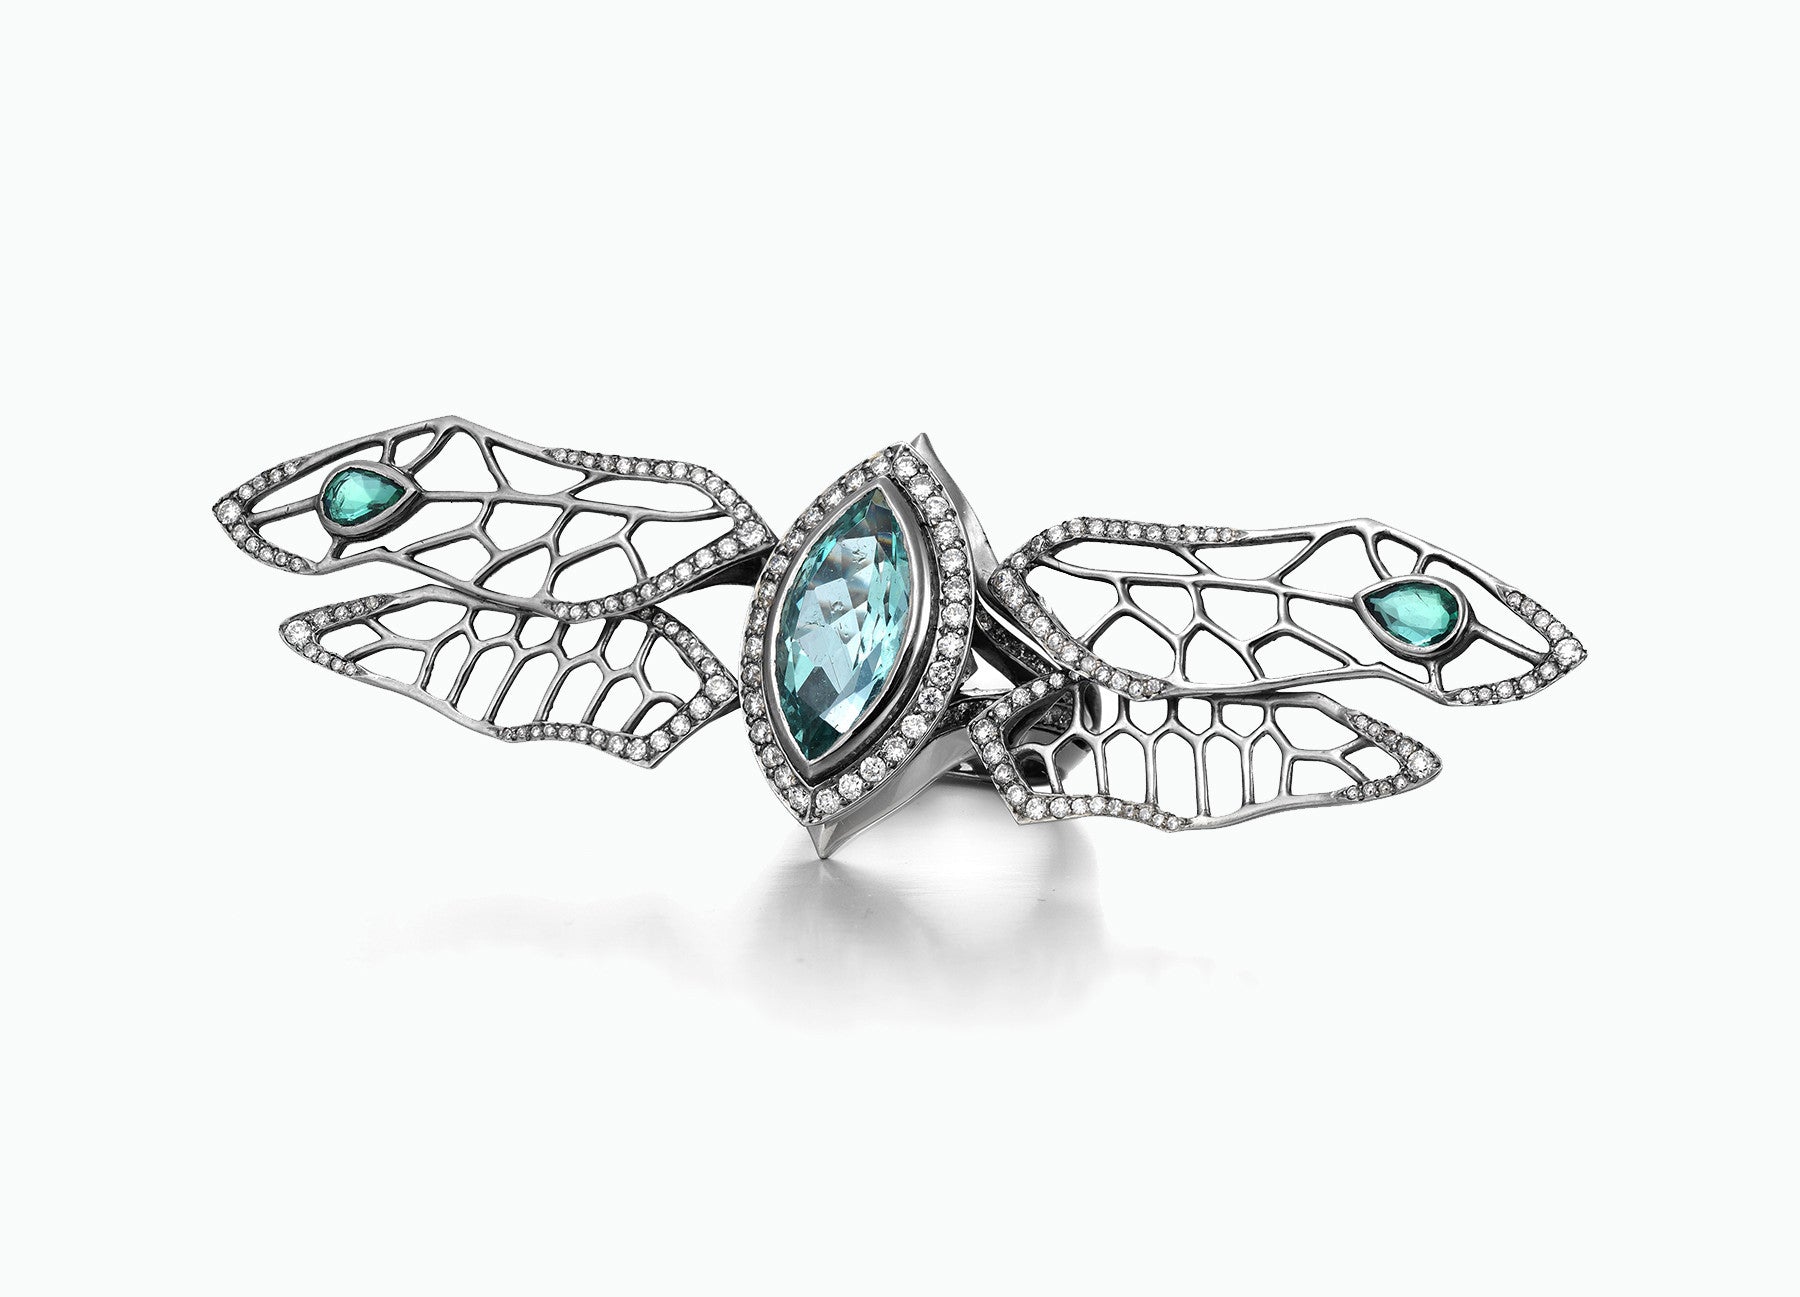 ONE OF A KIND DRAGONFLY RING